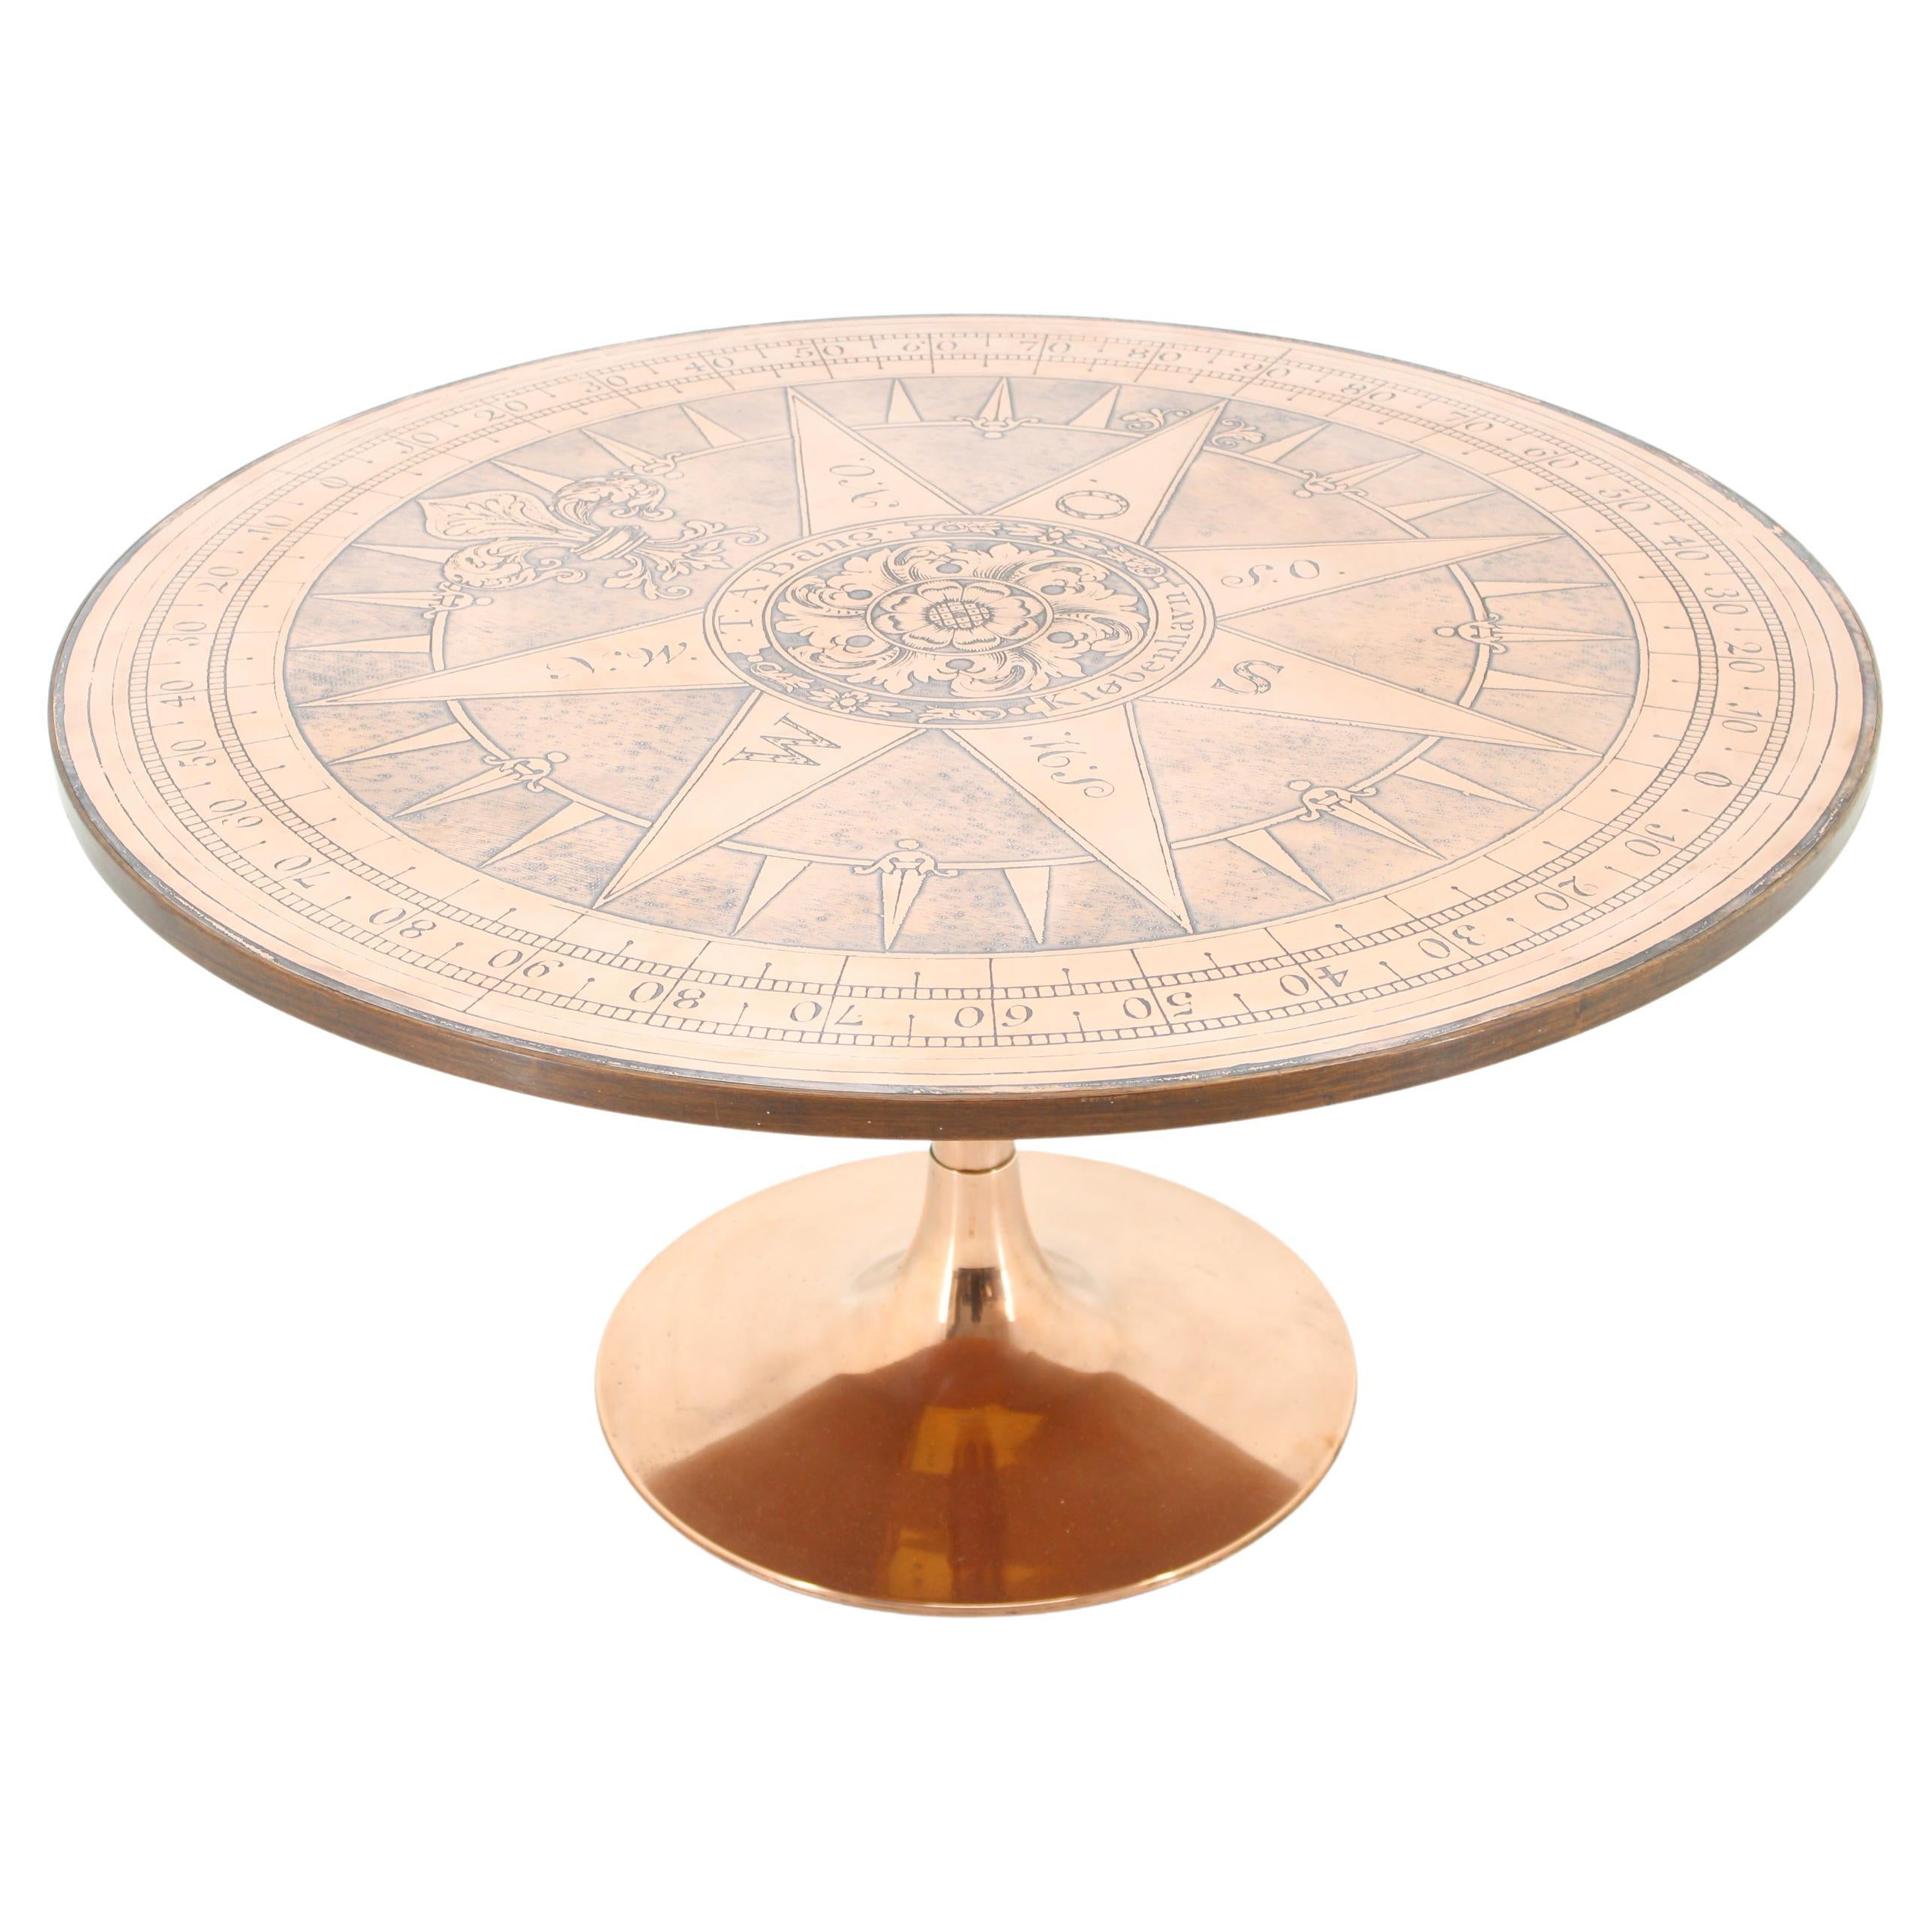 1960s Round Copper Coffee Table, Denmark For Sale